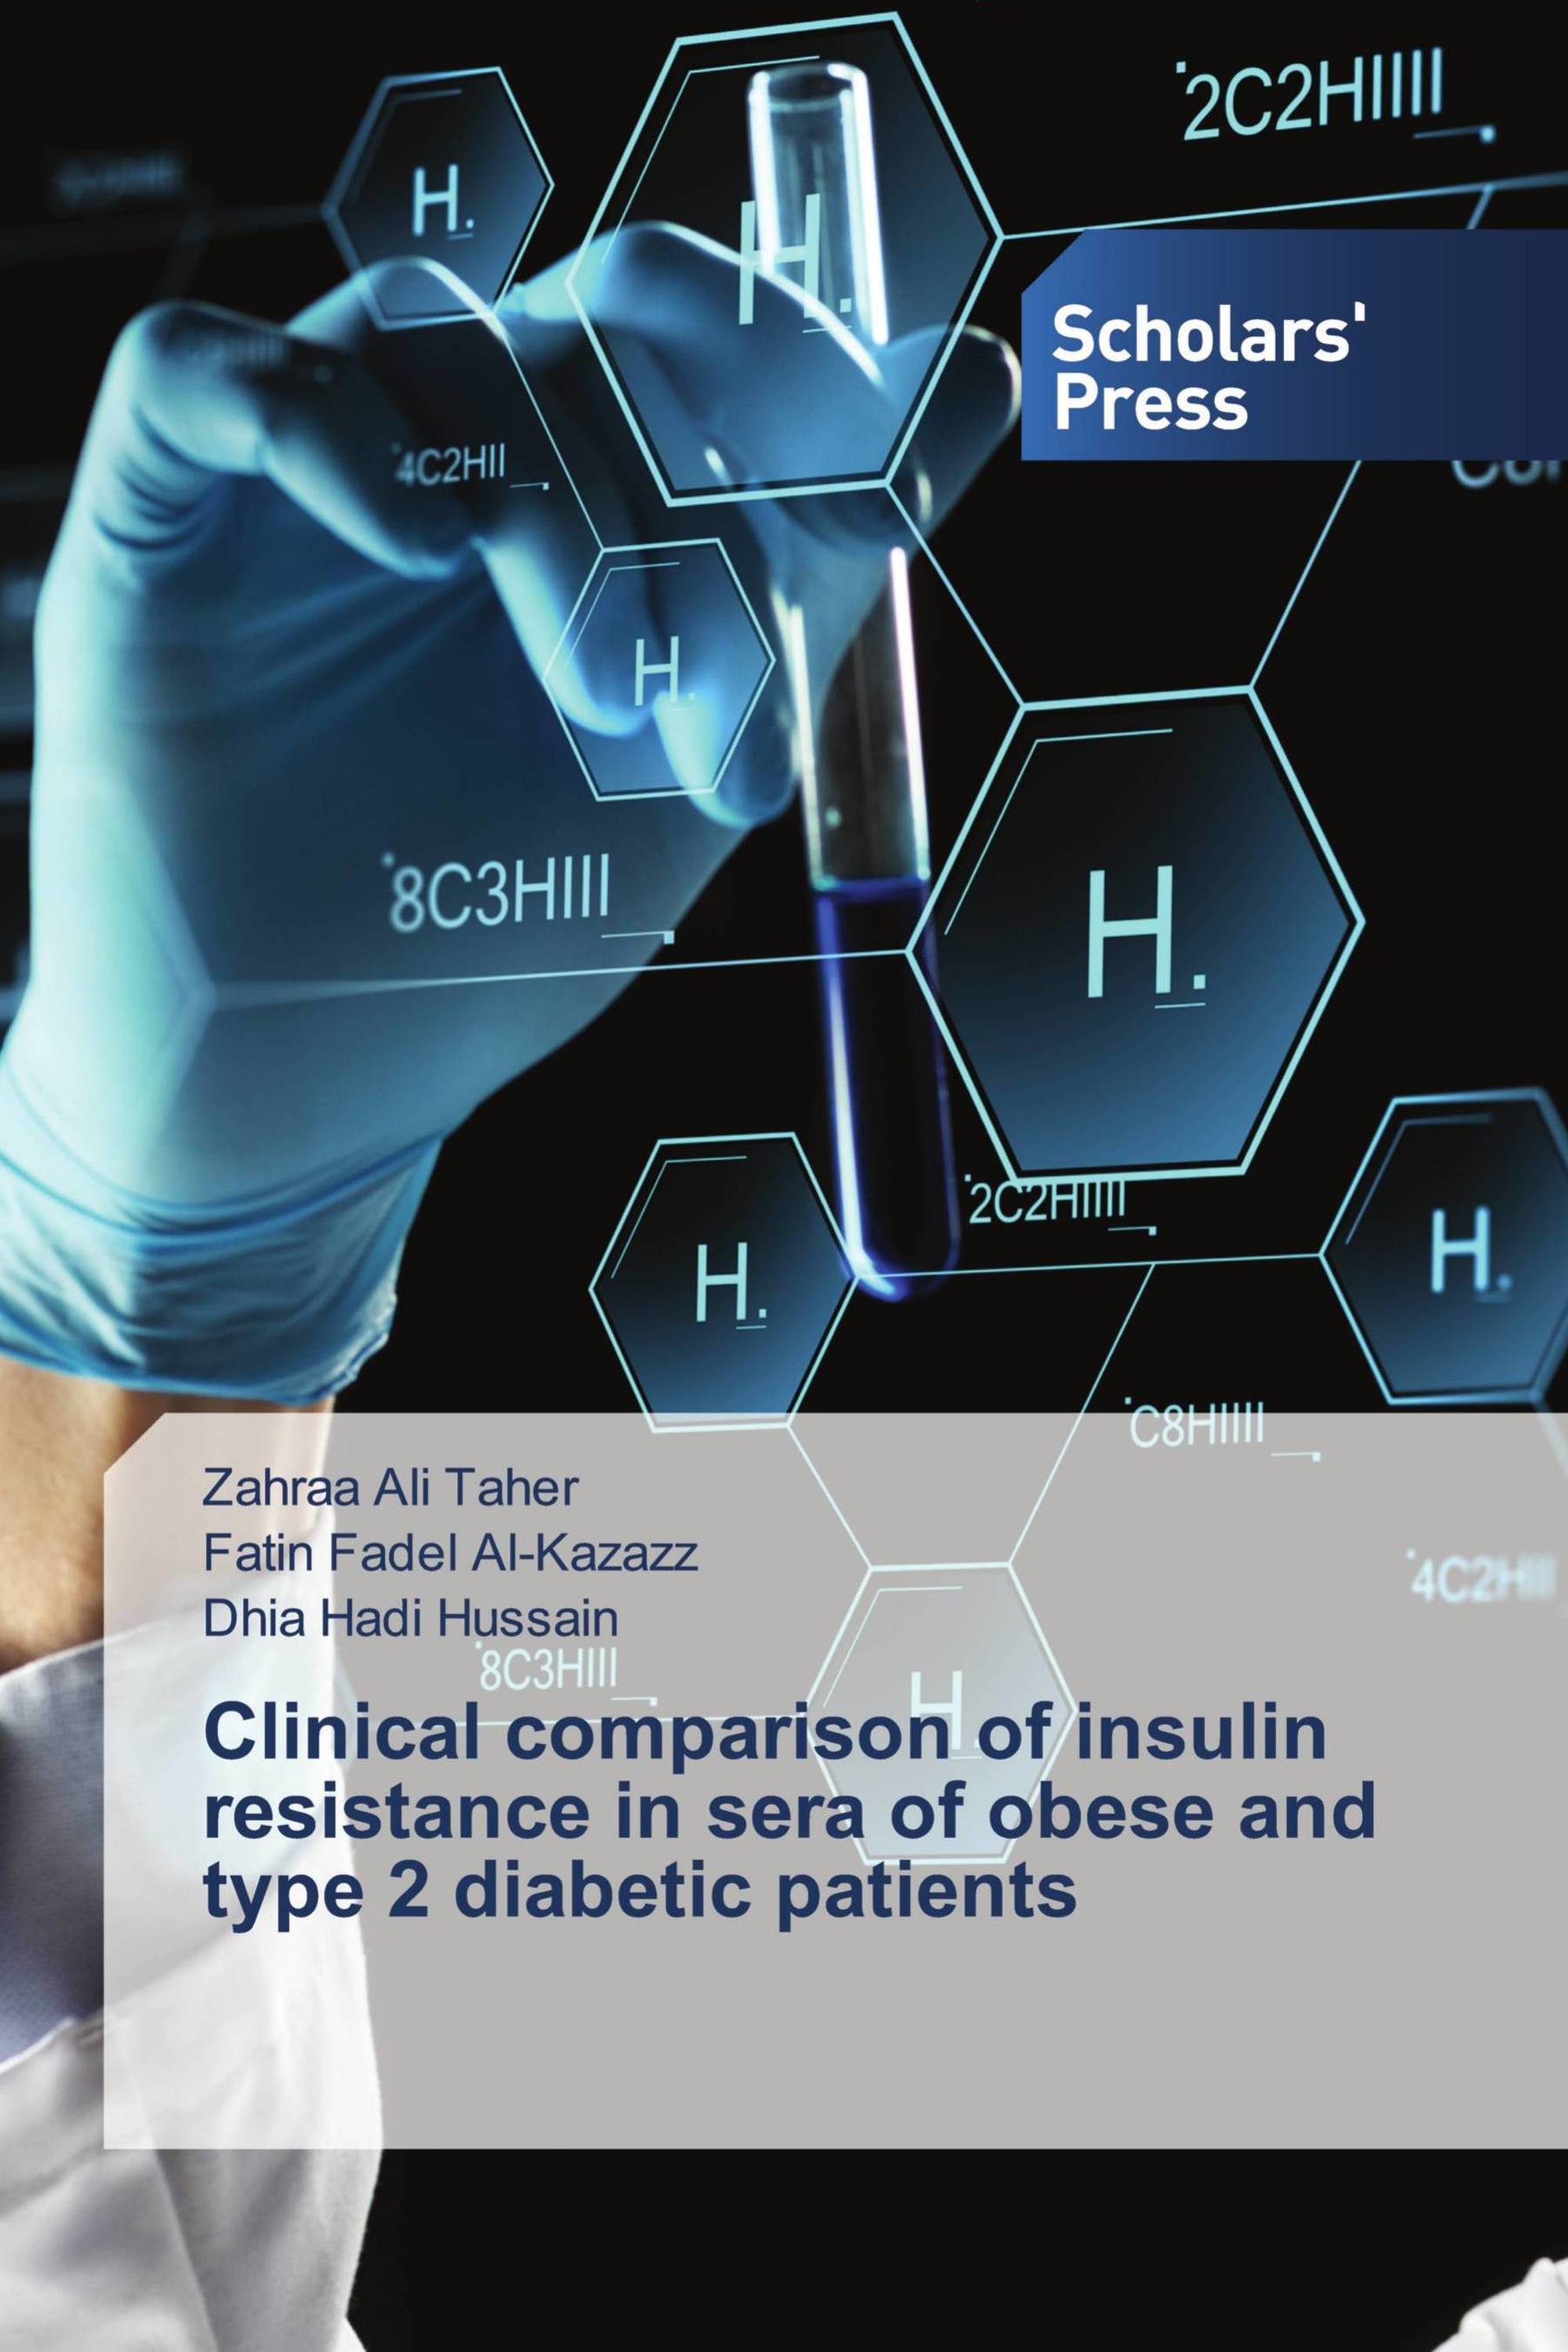 Clinical comparison of insulin resistance in sera of obese and type 2 diabetic patients